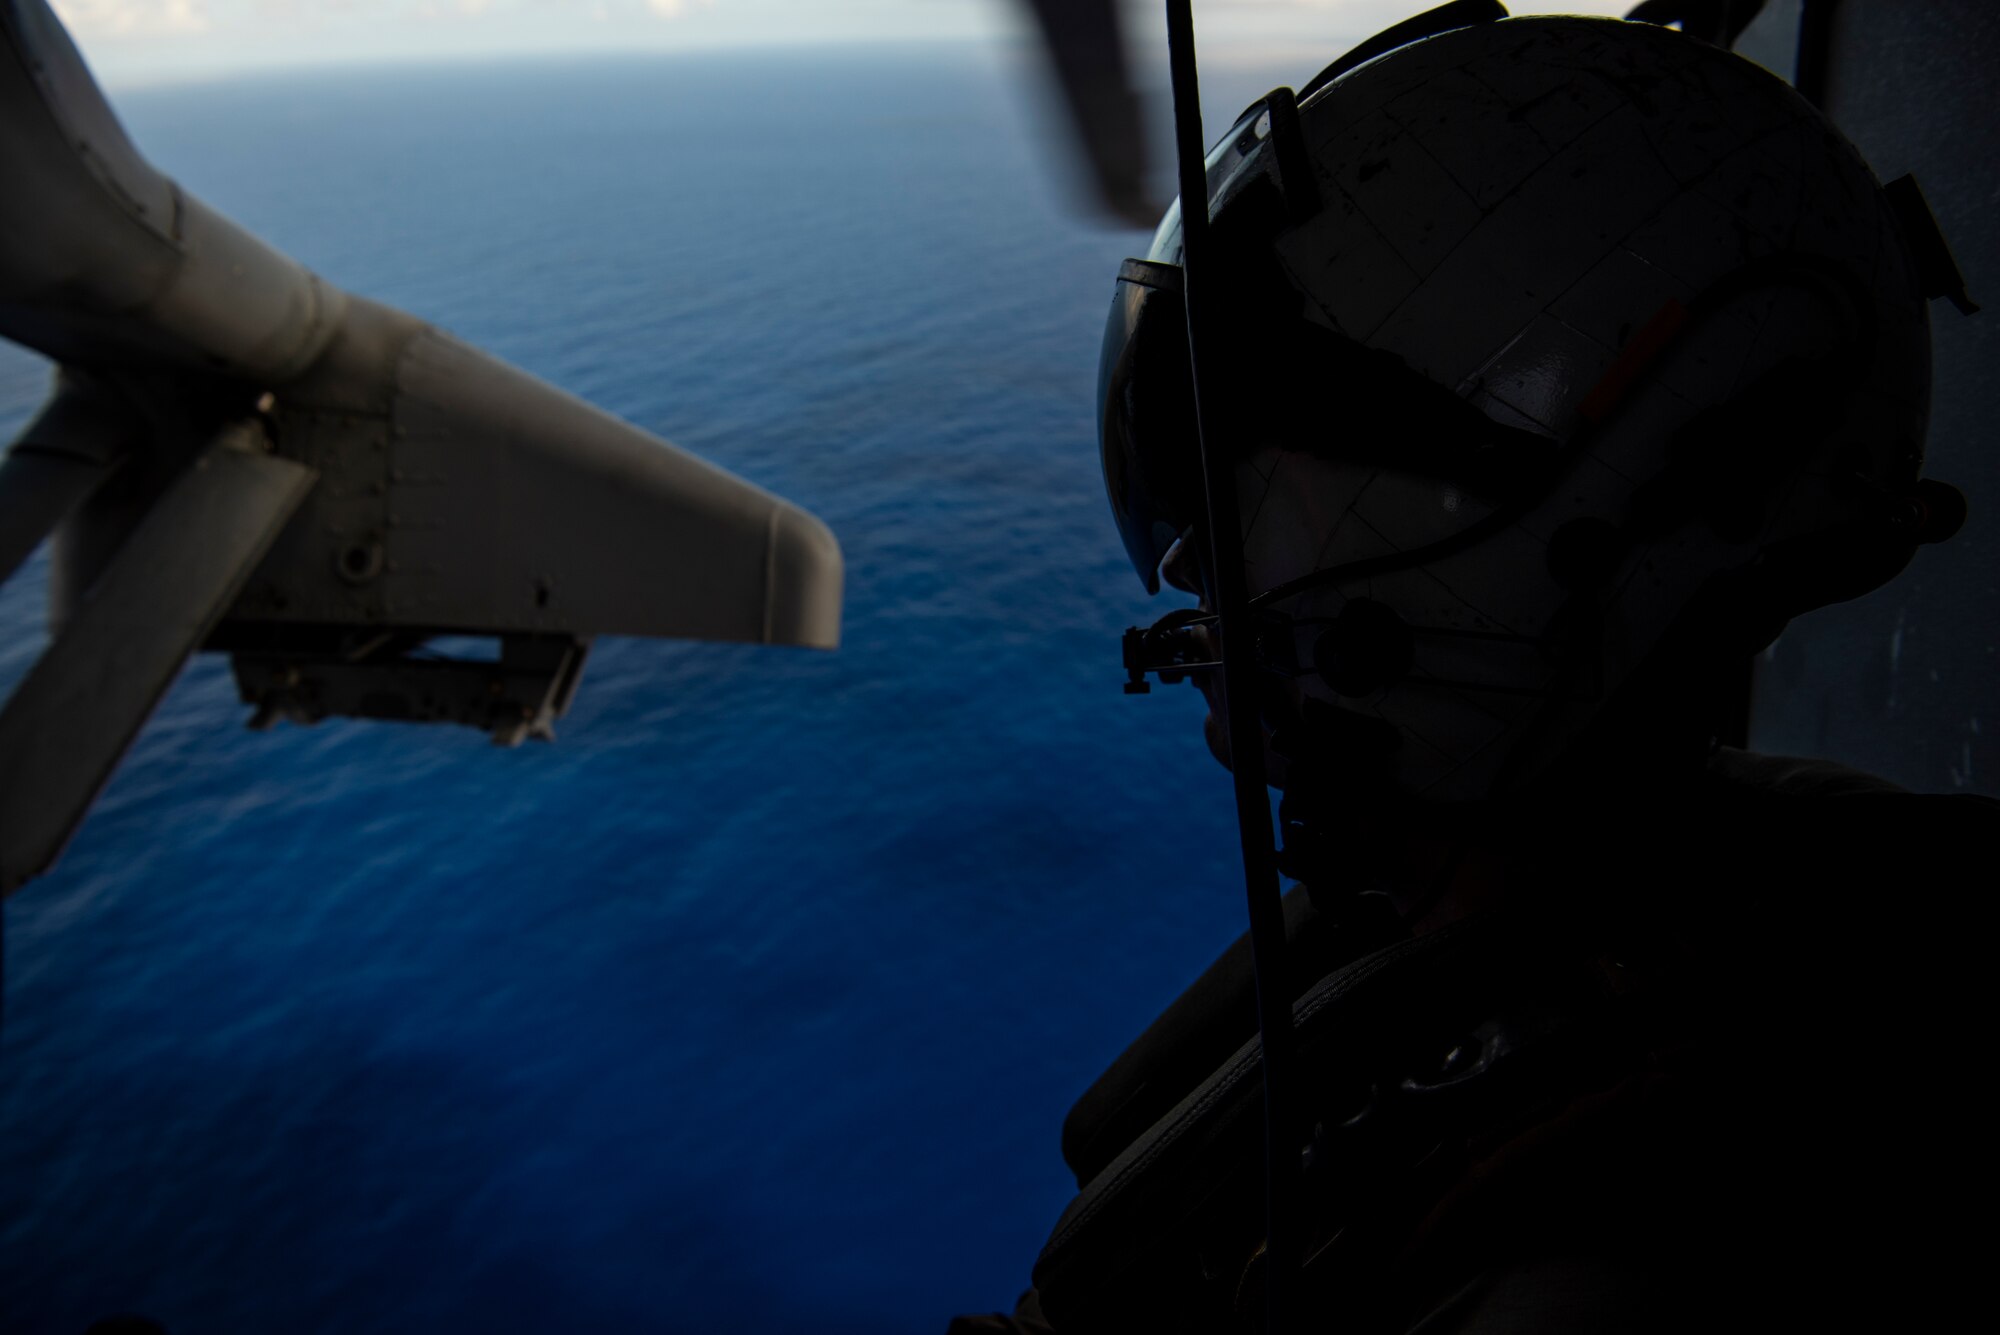 U.S. Navy Air Crewman 2nd Class Zach Morrissey (Helicopter) assigned to Helicopter Sea Combat Squadron 25, travels over Andersen Air Force Base, Guam, during an “Elephant Walk” in an MH-60S Knighthawk over the Pacific Ocean, April 13, 2020.